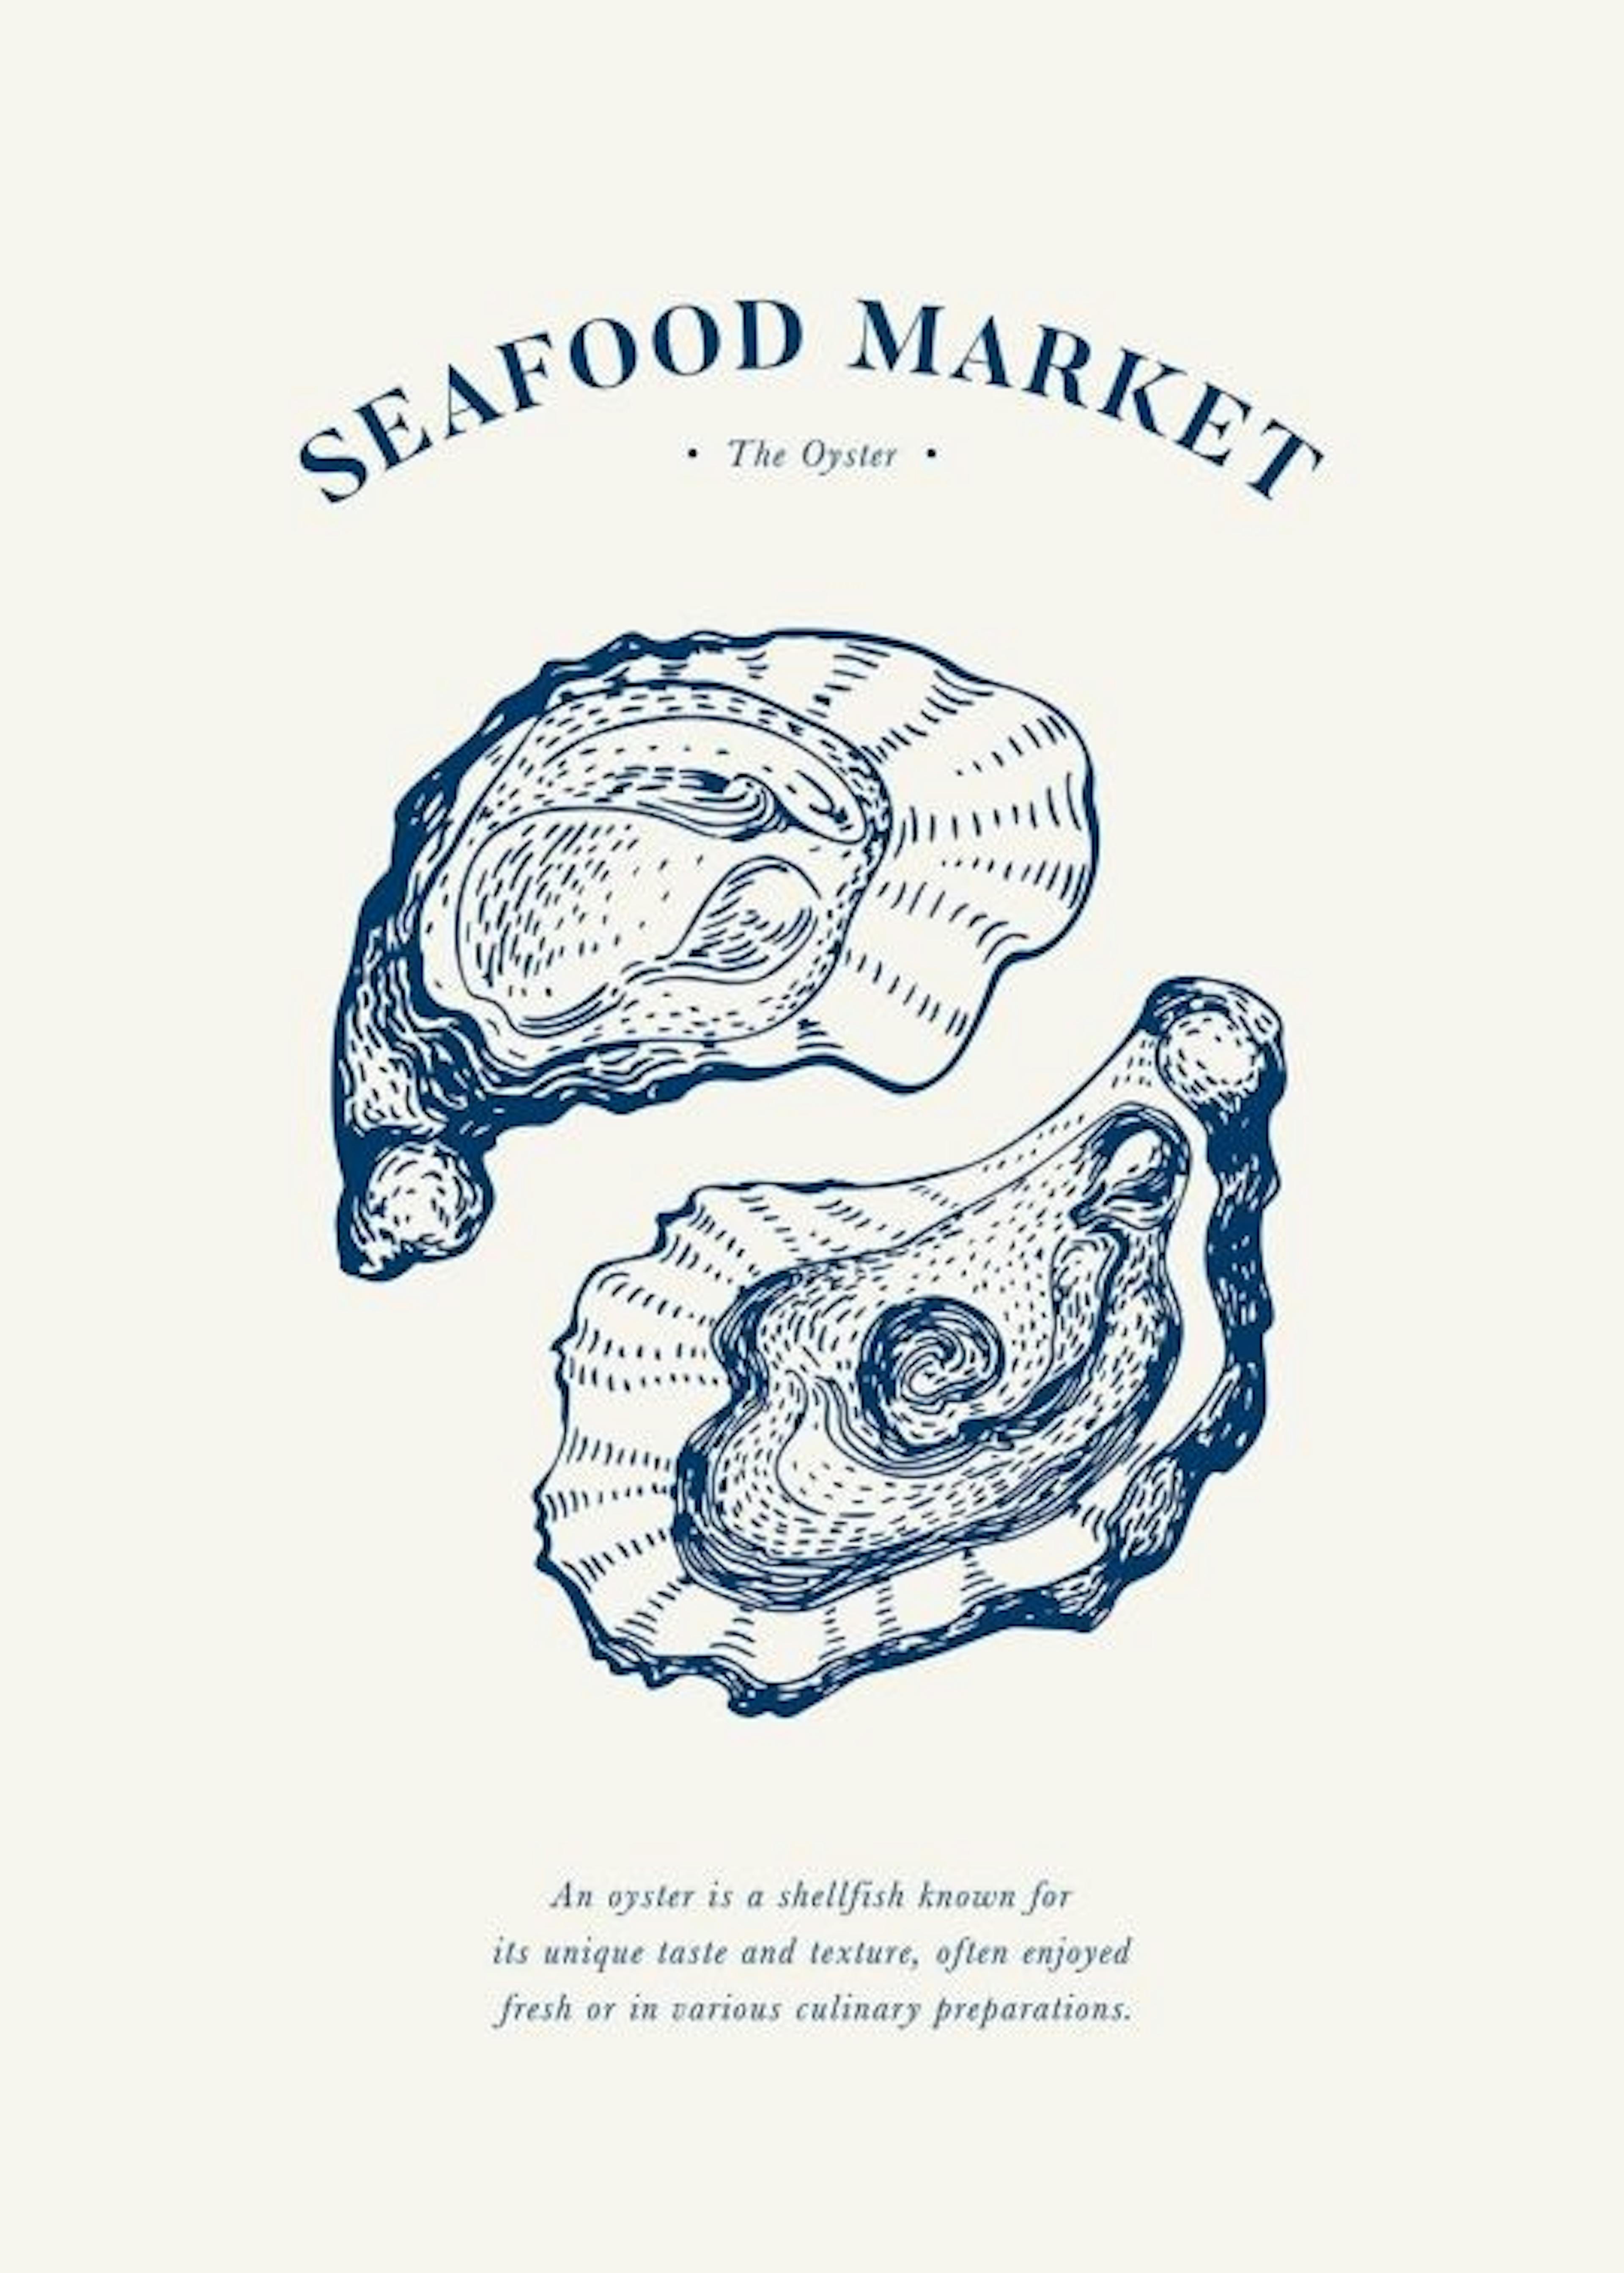 Seafood Market - The Oyster Poster 0